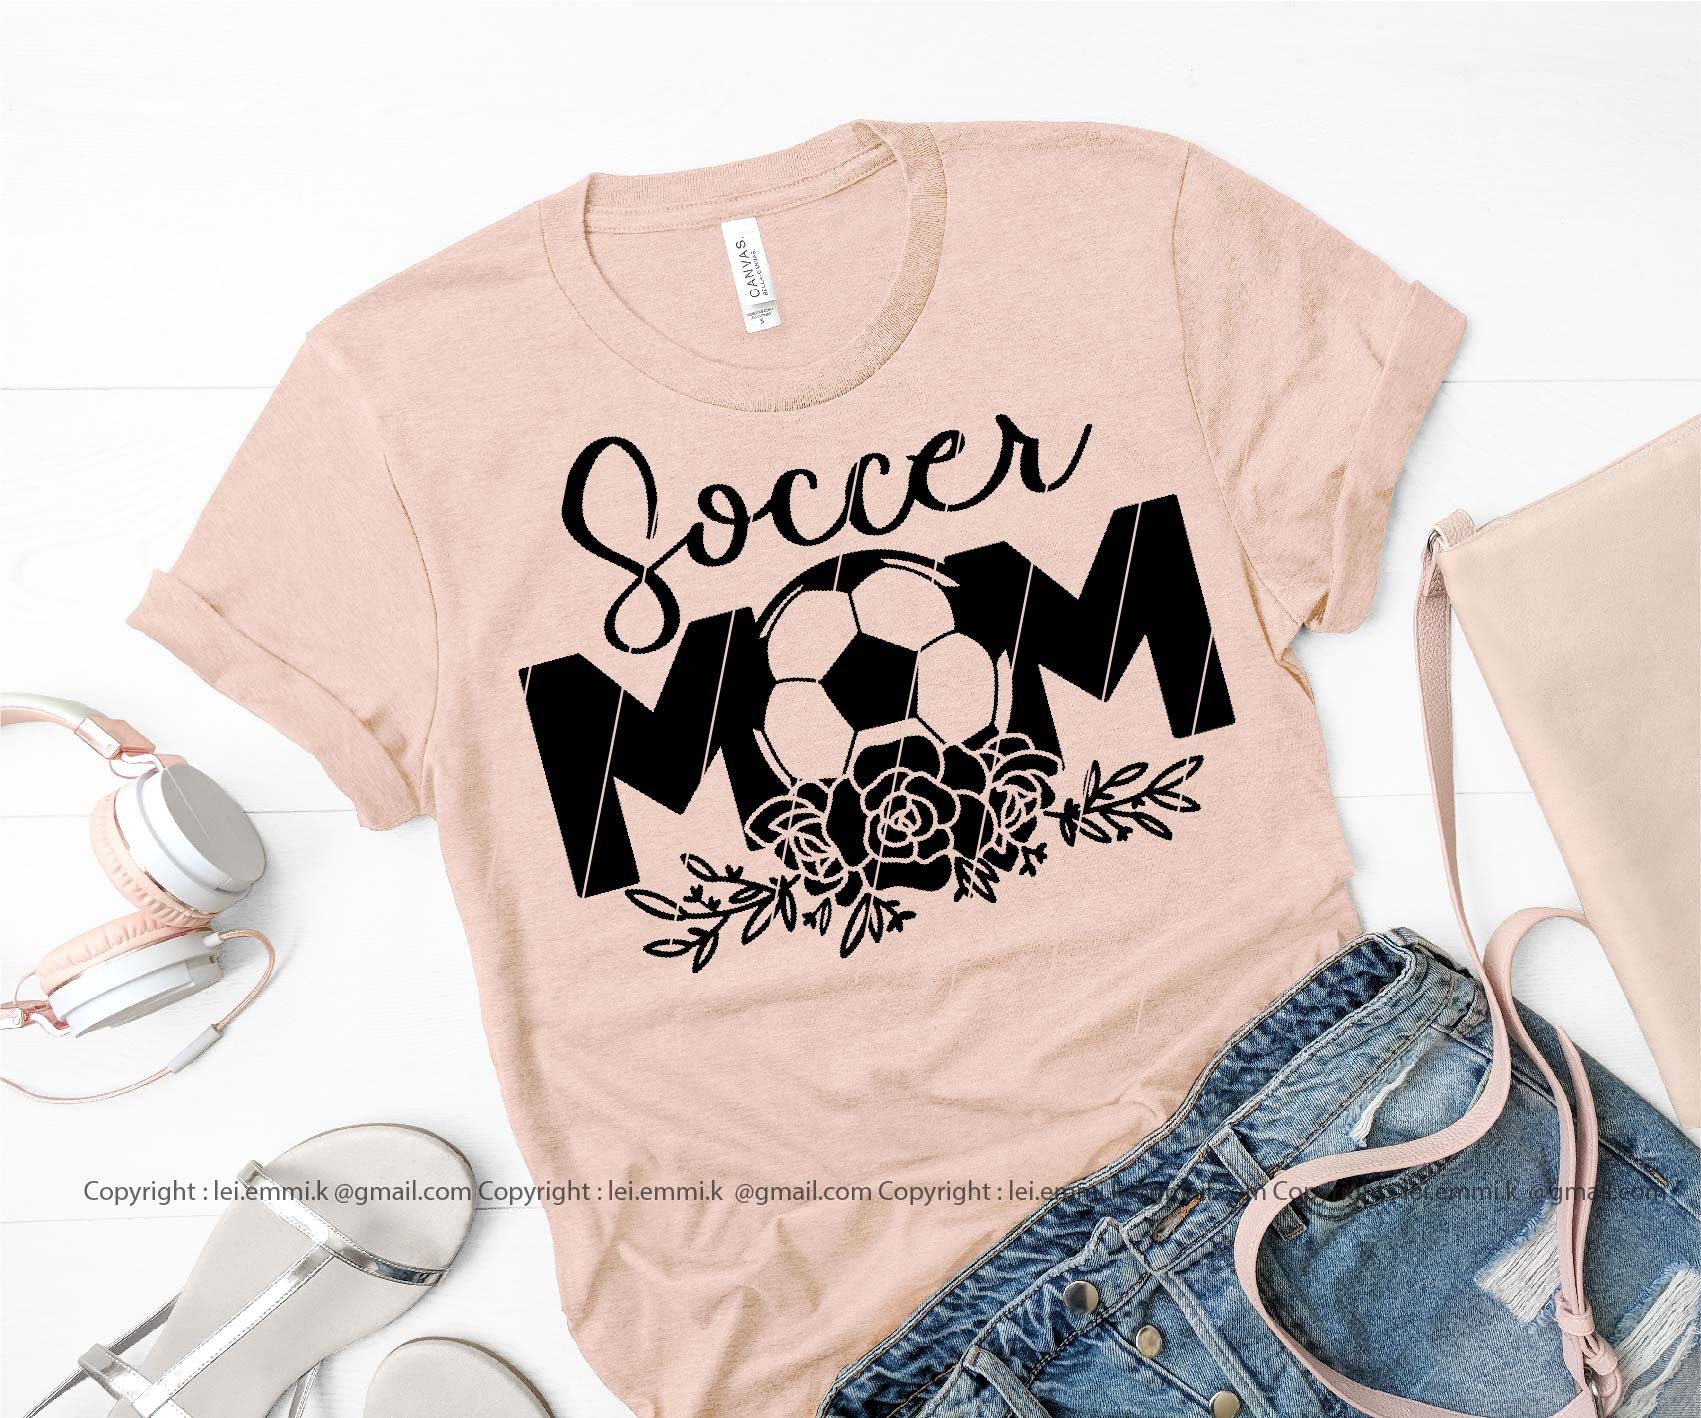 Soccer mom SVG Files for cricut and silhouette cameo. Free | Etsy